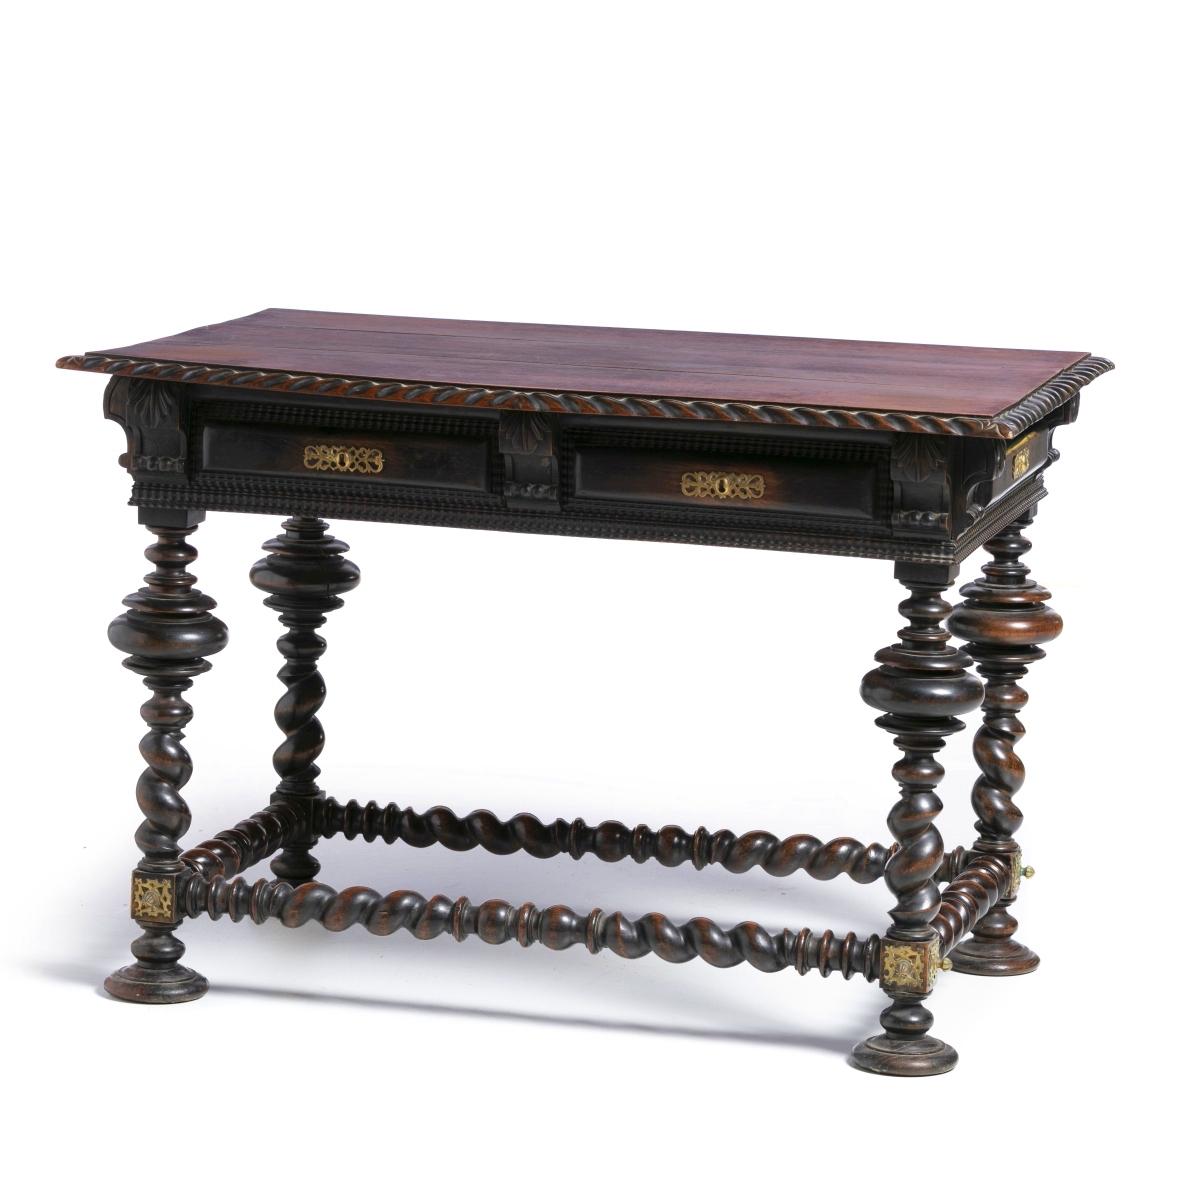 Romantic Portuguese Buffet Table, 19th Century Walnut Wood For Sale